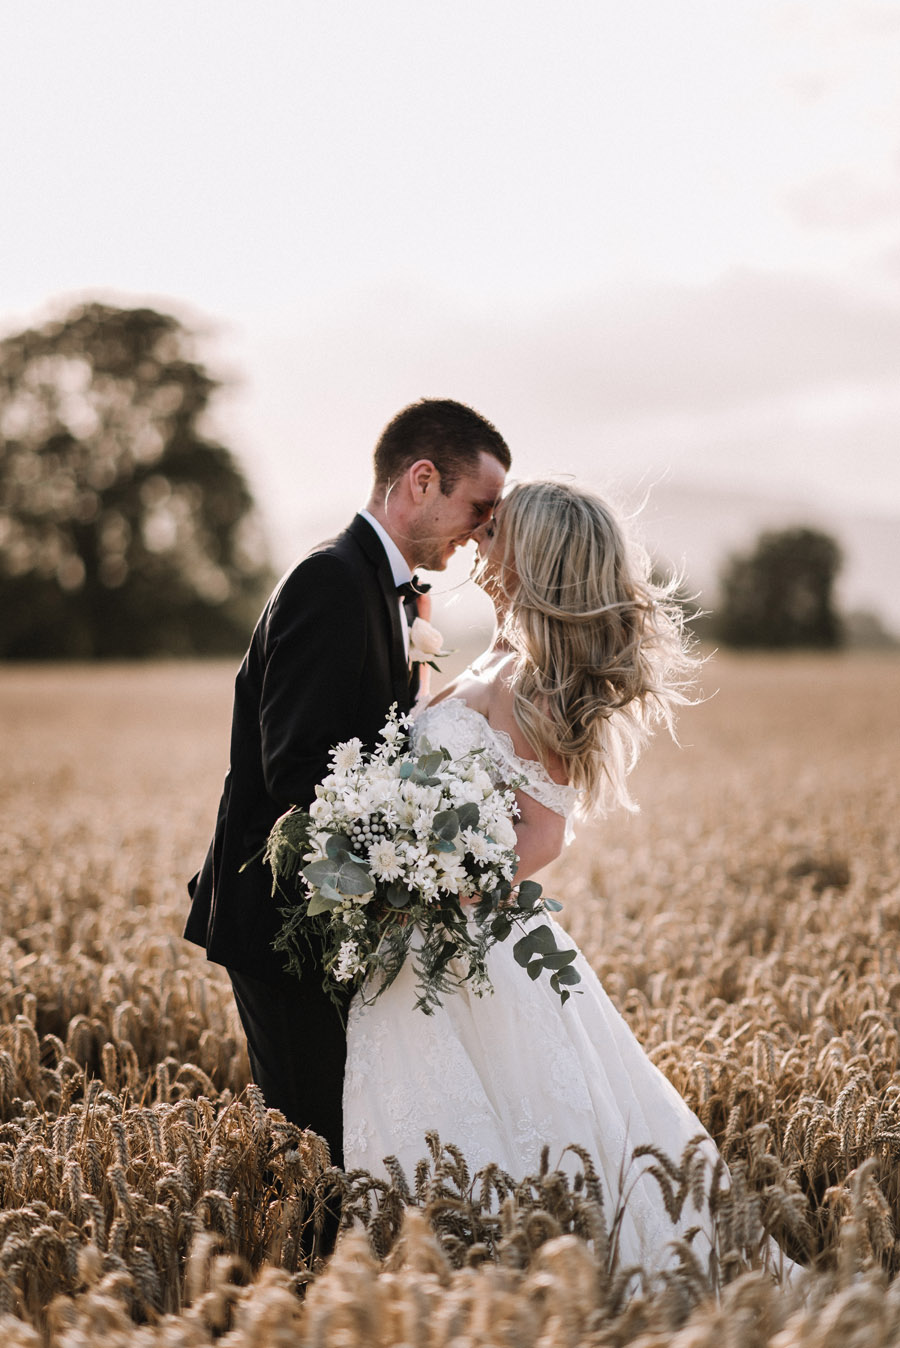 Whimsical wedding at Birtsmorton Court with beautiful photography by Oobaloos (39)